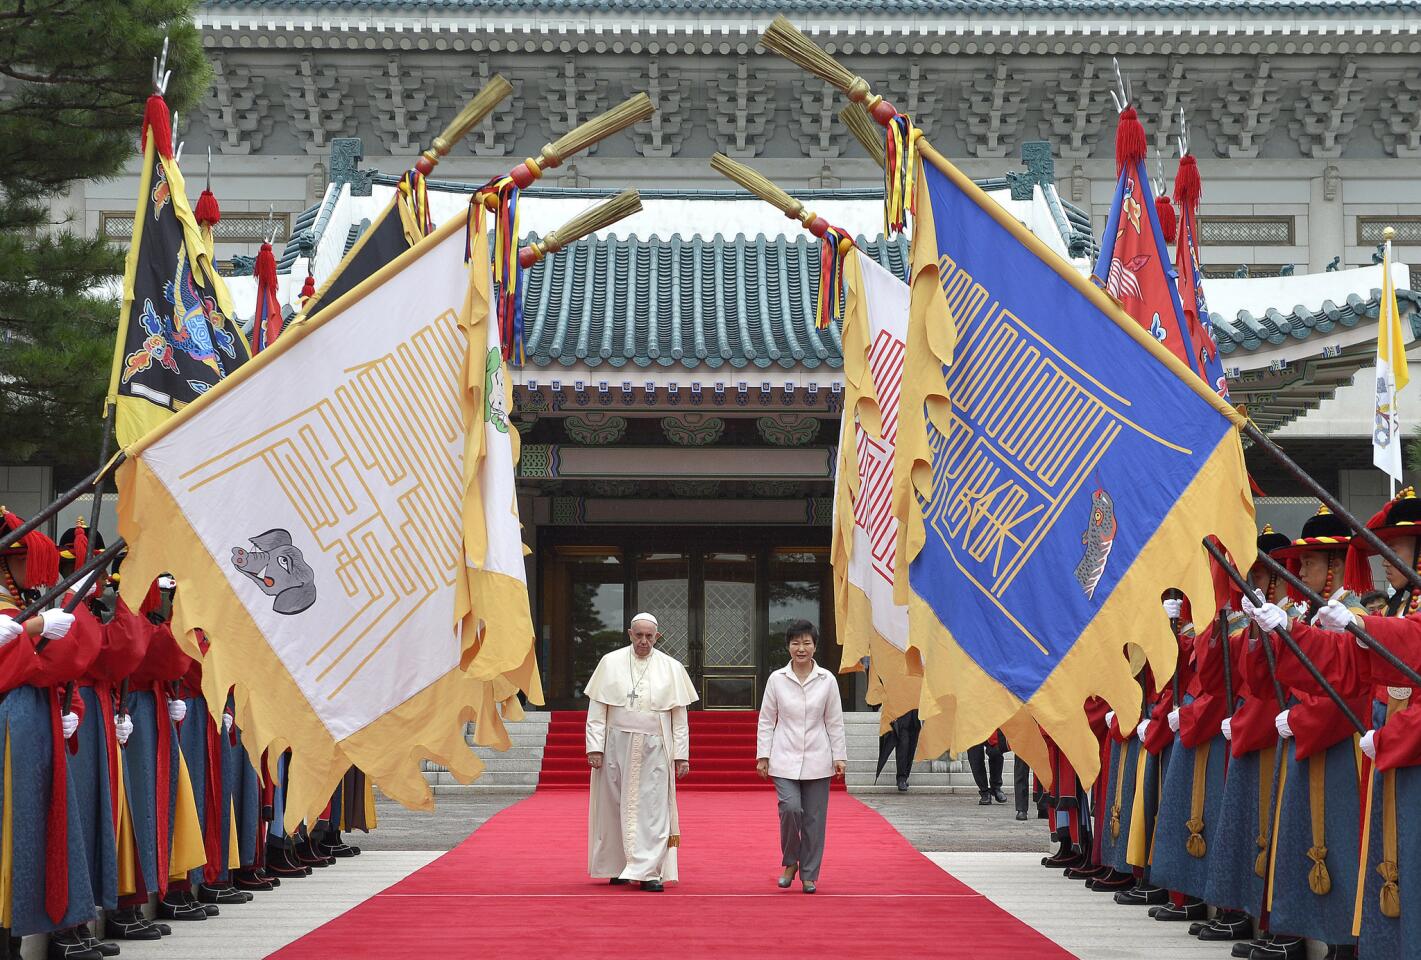 Pope Francis in South Korea